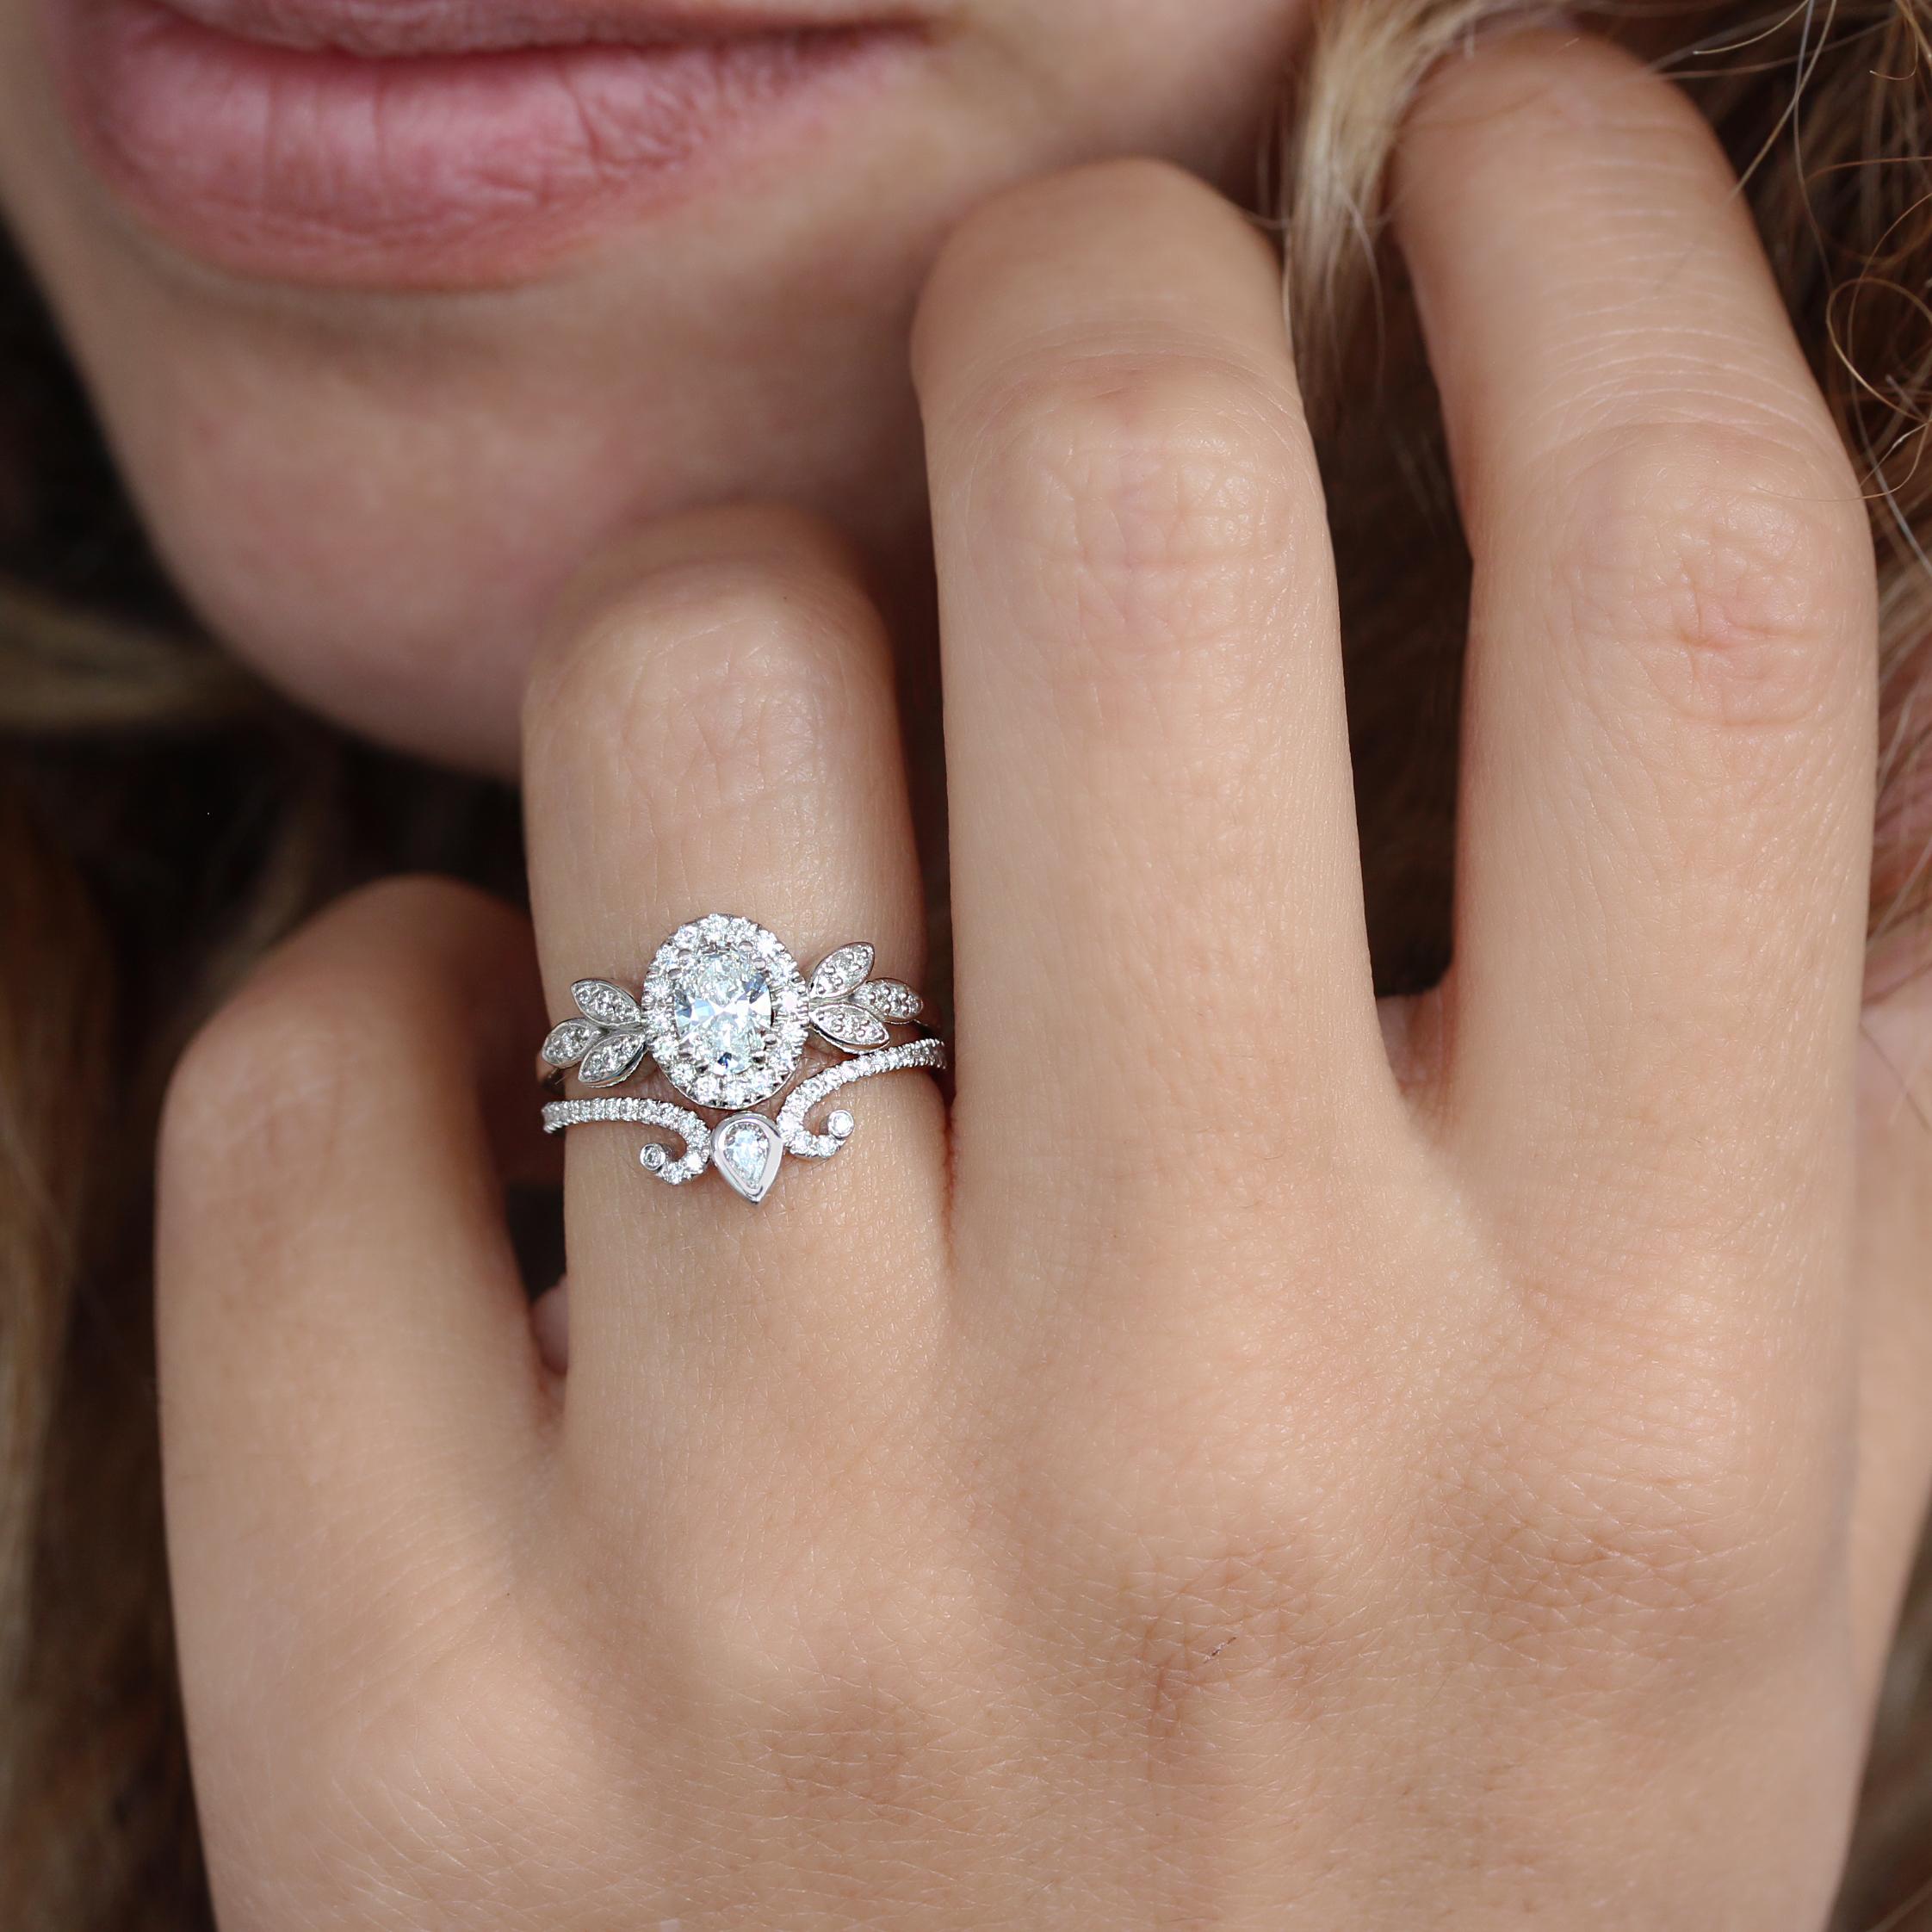 Floral oval Moissanite halo unique engagement ring - Minimal Lily.
This list is for the engagement ring only.
* The center stone in the video is 1.0 carat.
Handmade with care. 
An original design by Silly Shiny Diamonds. 

Details:
* Center stone